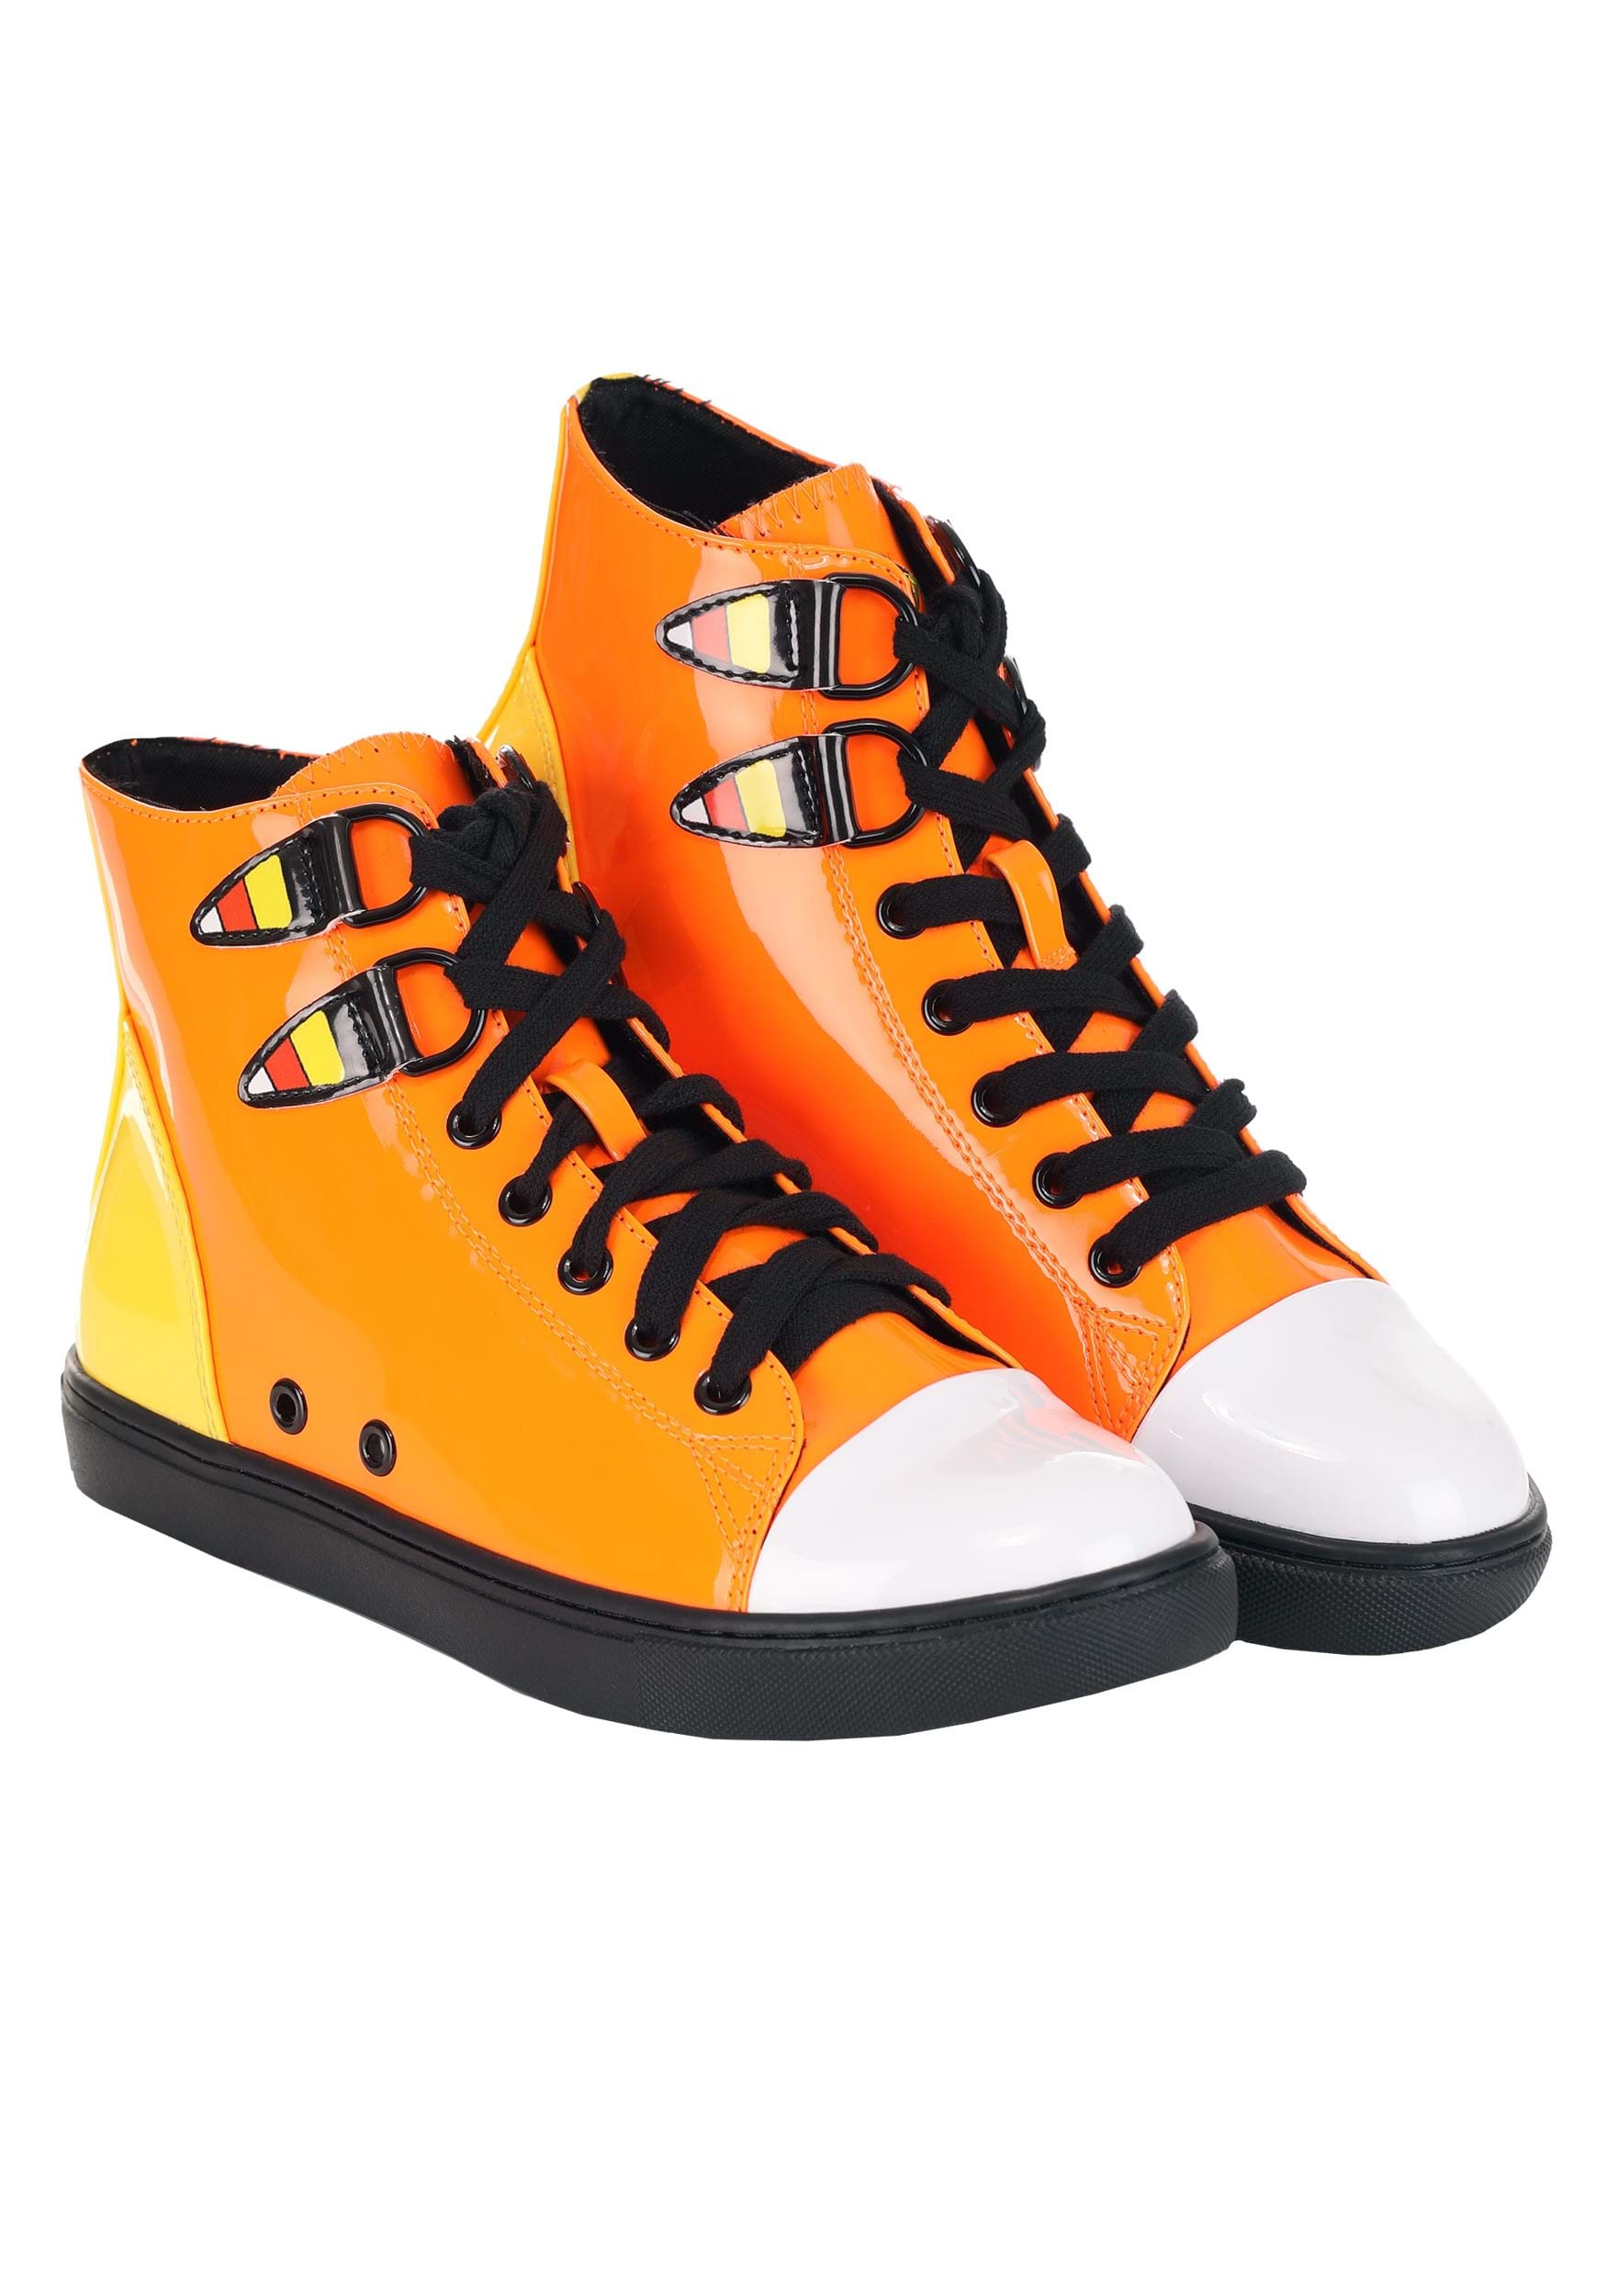 Image of Candy Corn Chelsea Patent High Top Sneakers ID SVCHELSEA-CORN-8